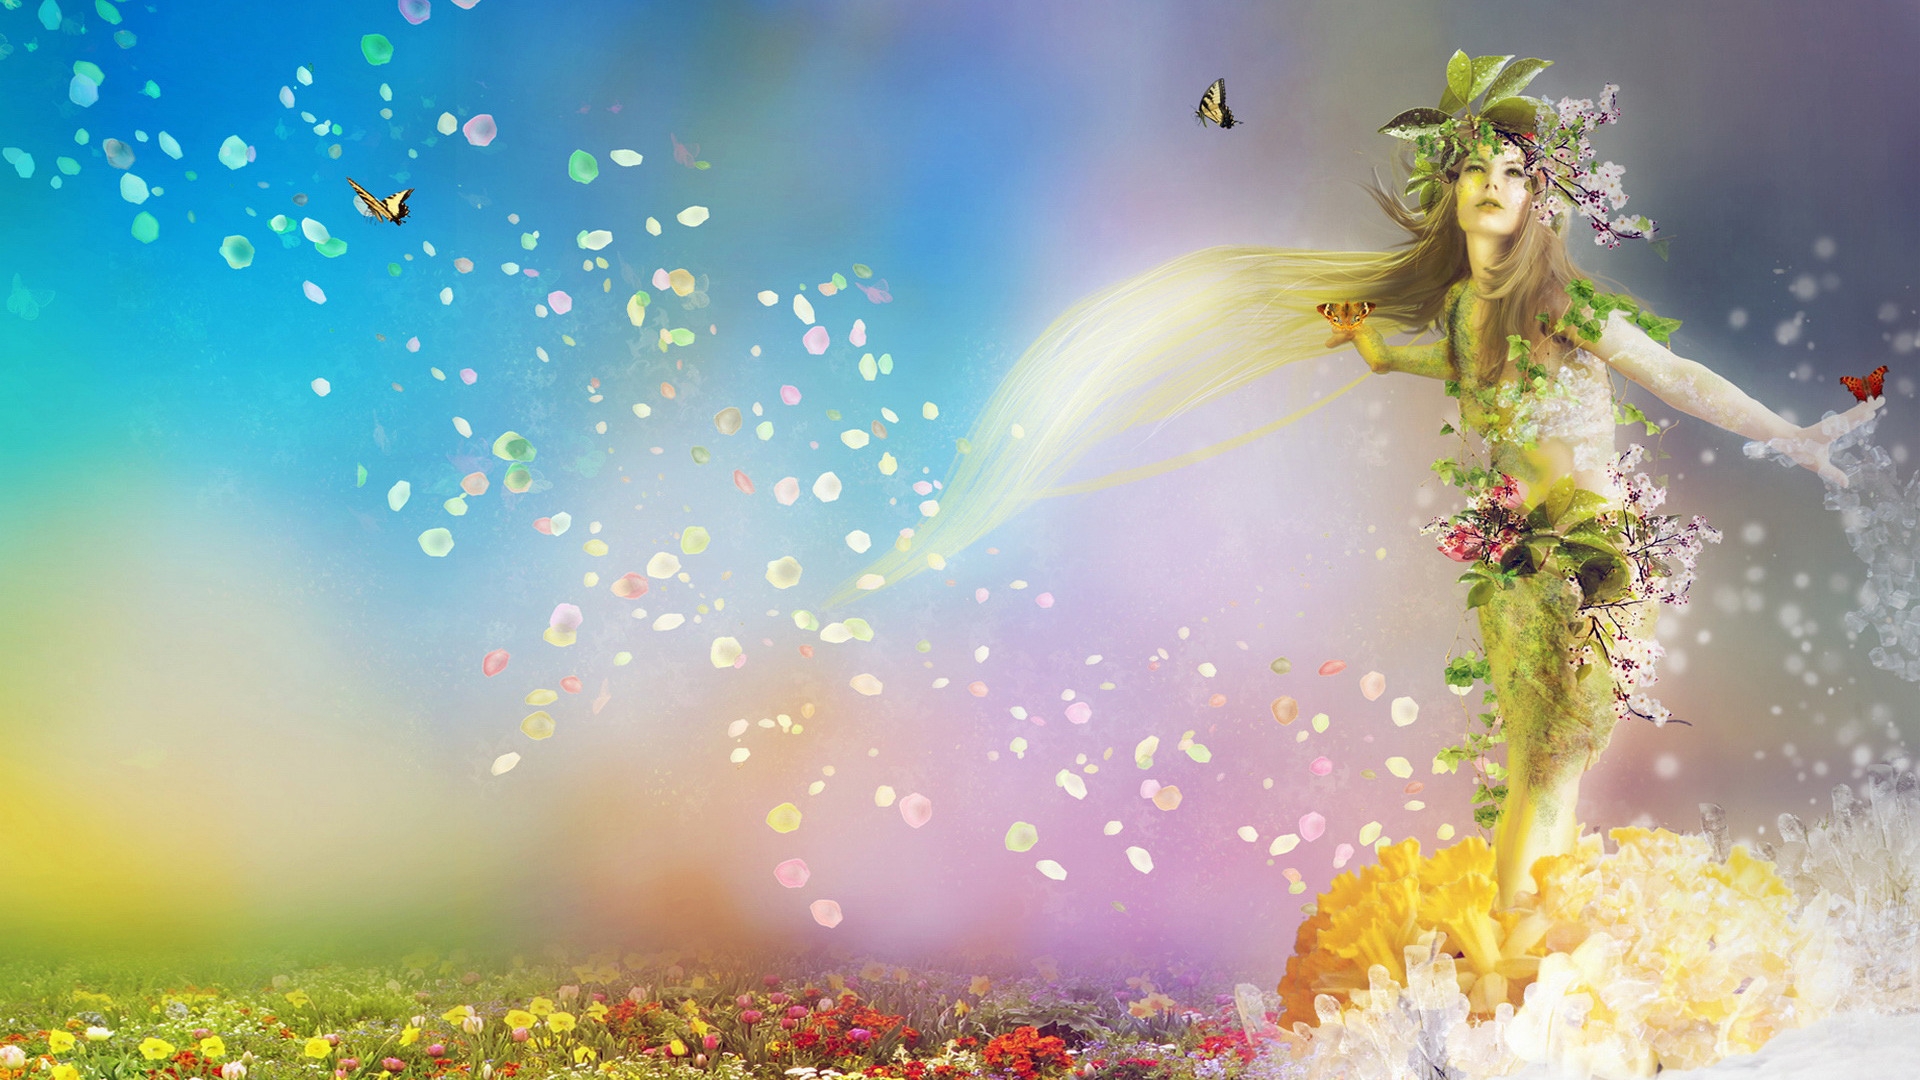 Fantasy Girl with Flowers for 1920 x 1080 HDTV 1080p resolution